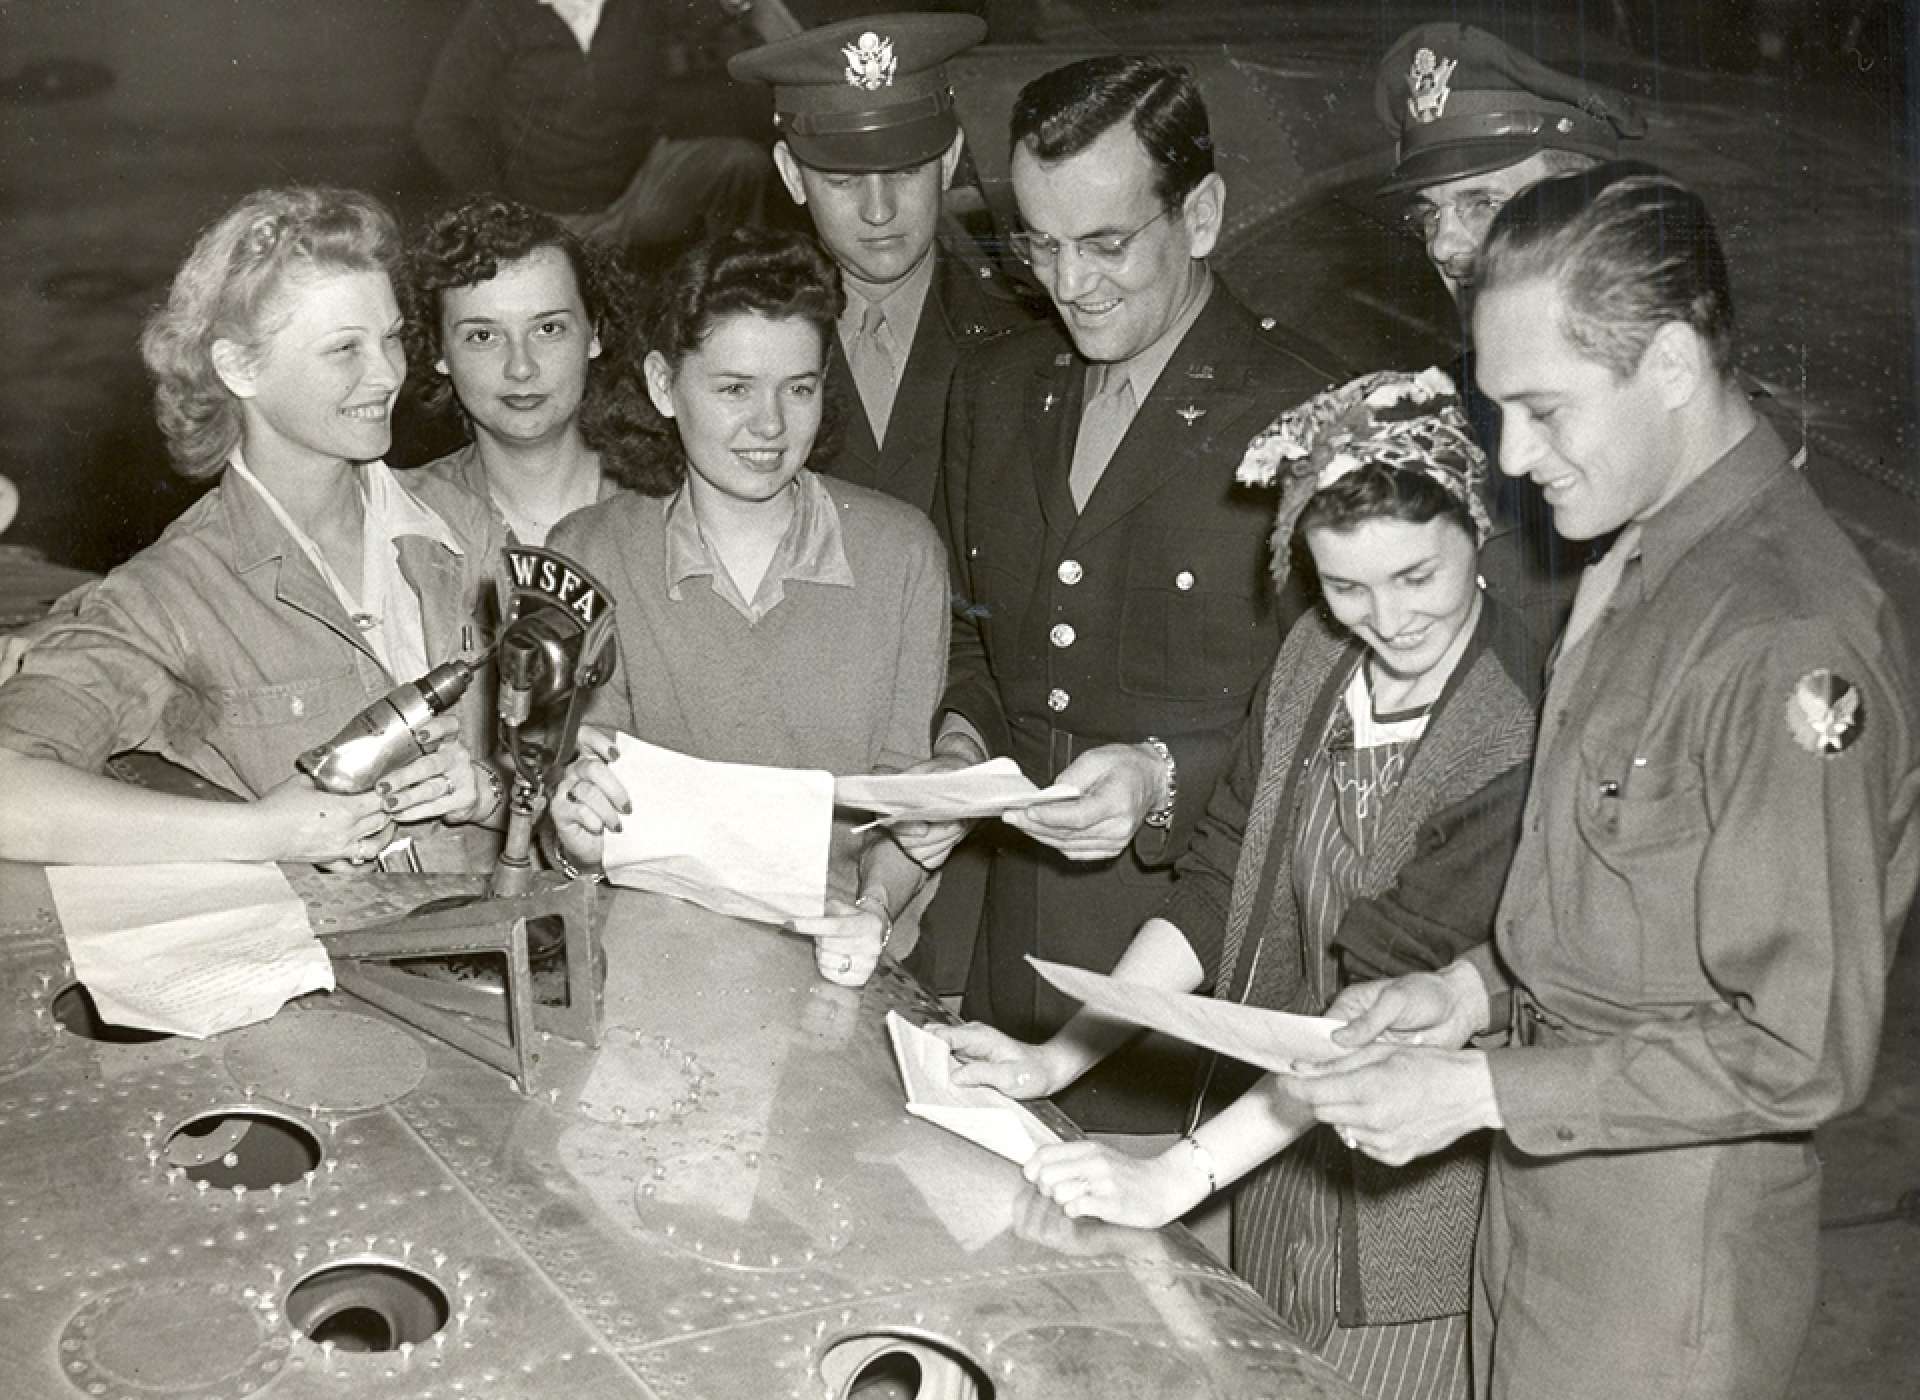 Miller (center) at the recording of one of the more than 500 radio broadcasts he and the Army Air Forces Band created. US Air Force photograph.